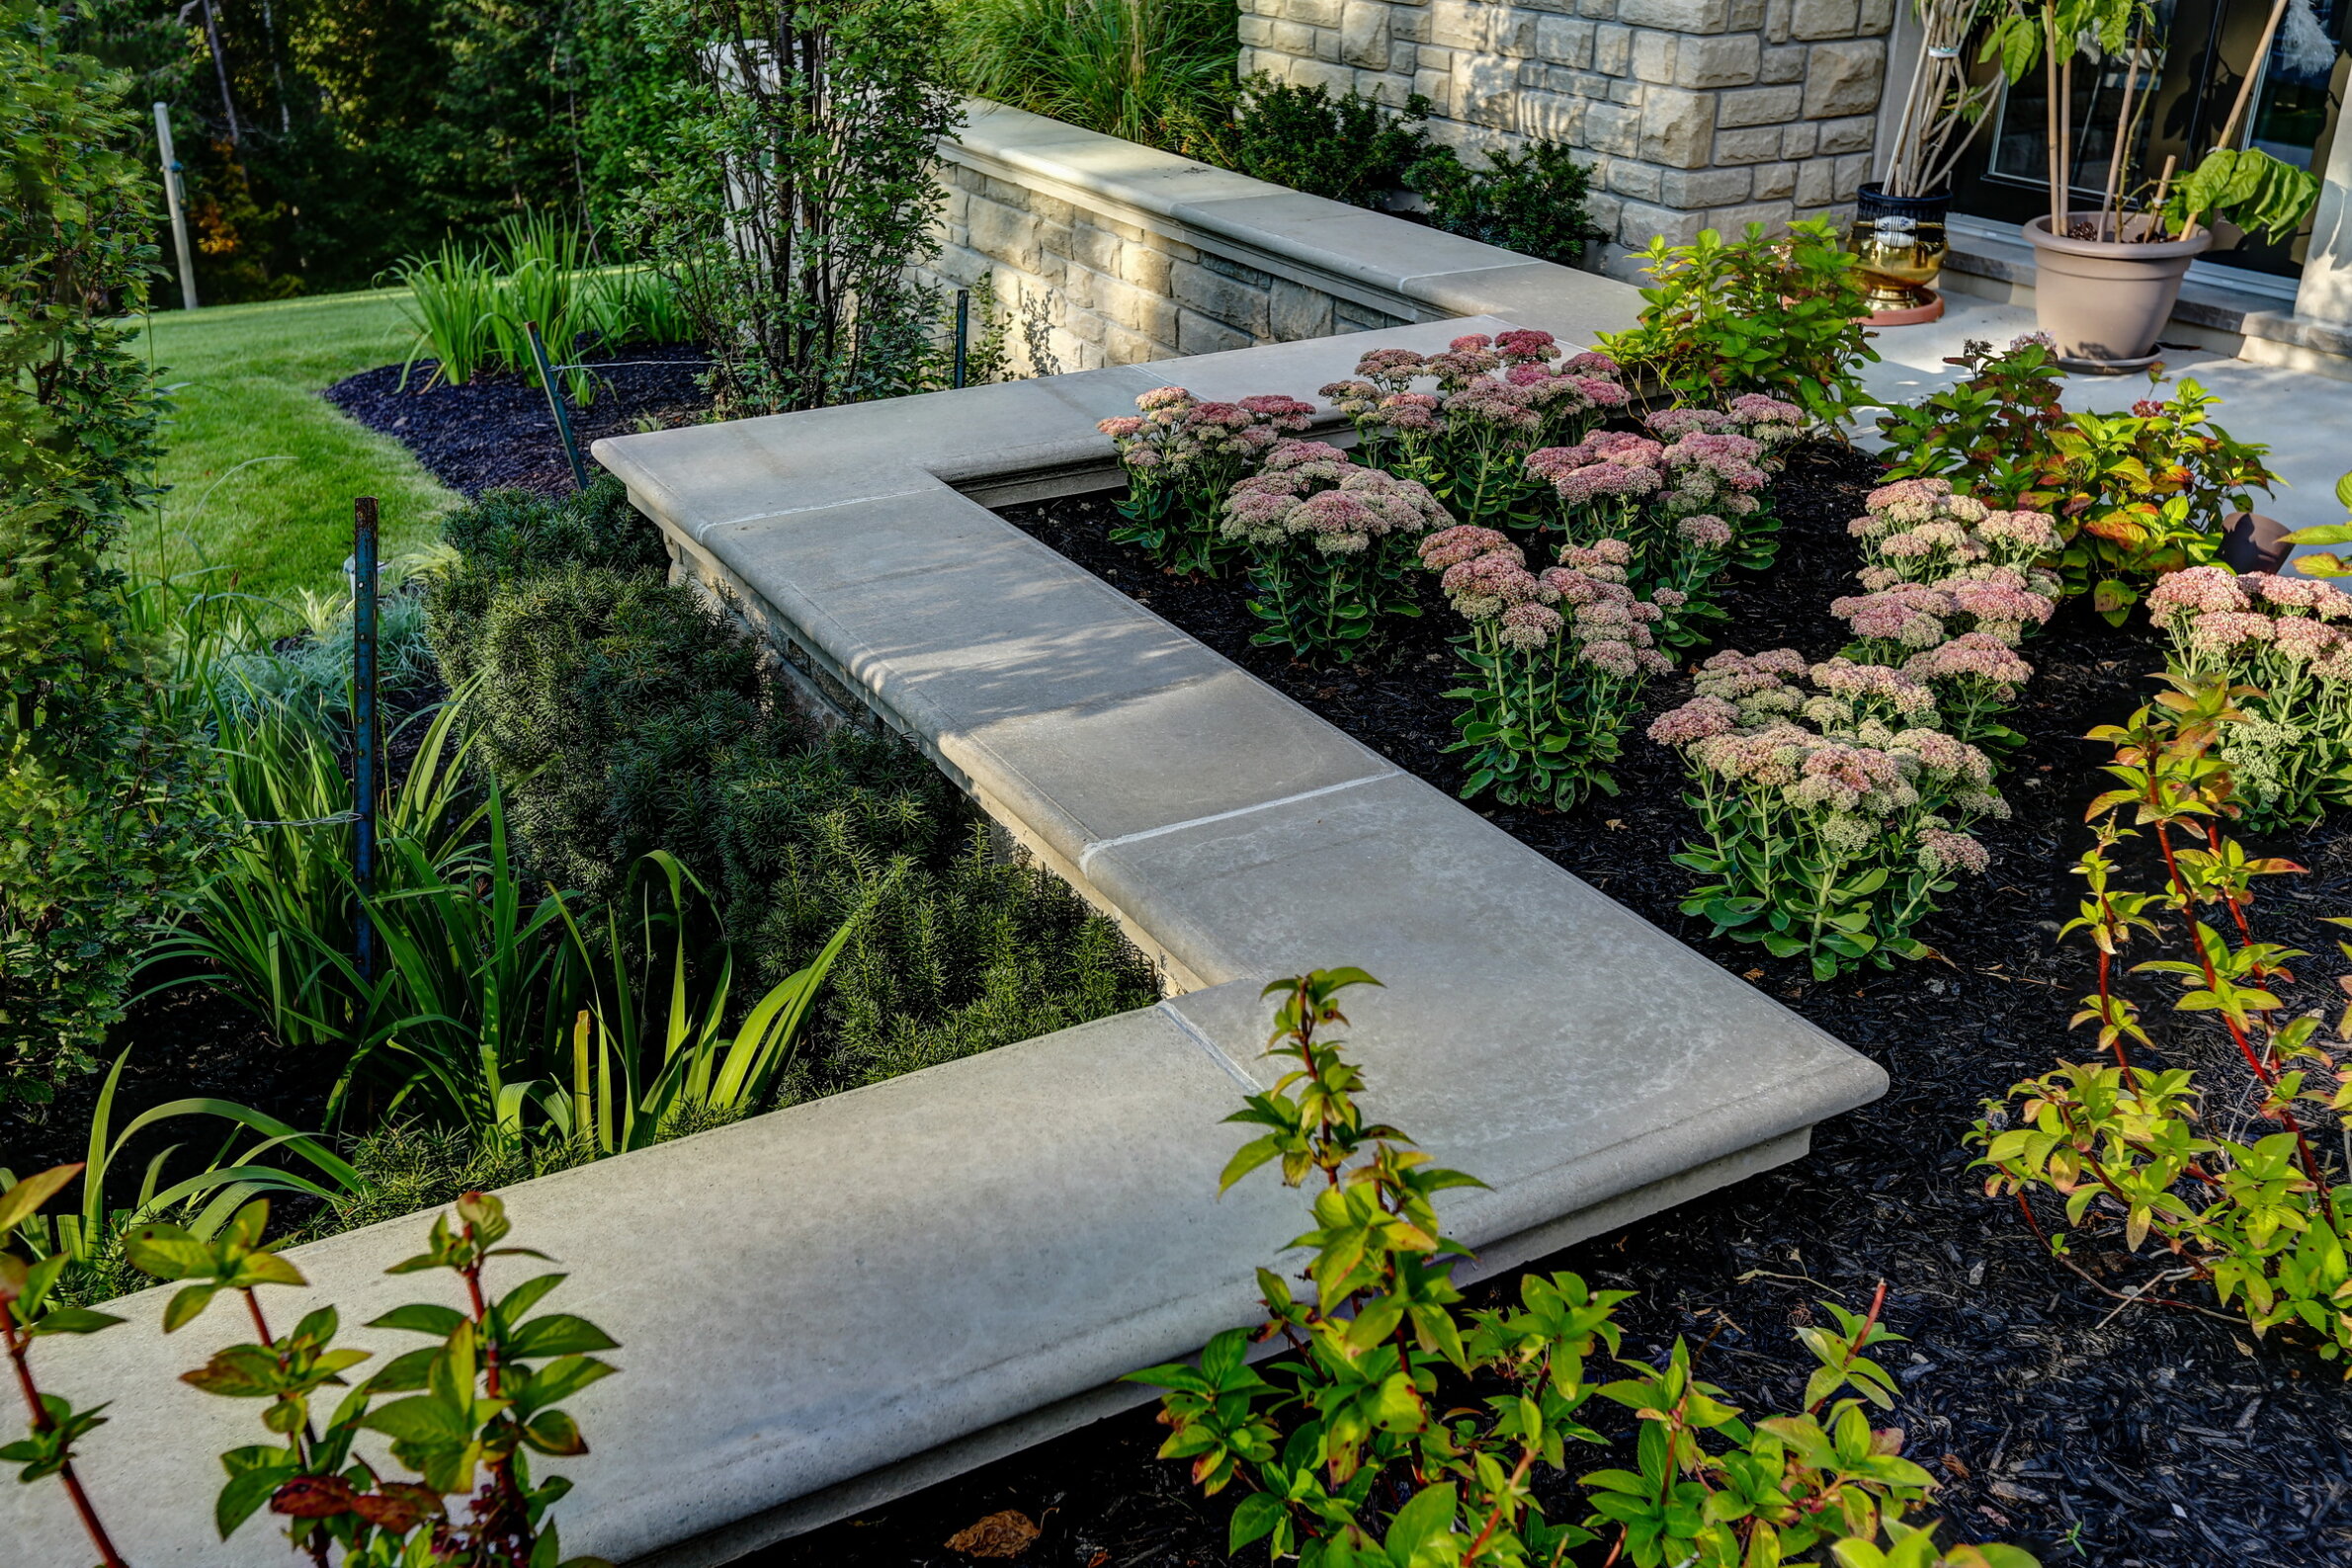 A landscaped garden featuring stone pathways, blooming pink flowers, lush greenery, and a neatly mulched bed with a stone wall and potted plant.